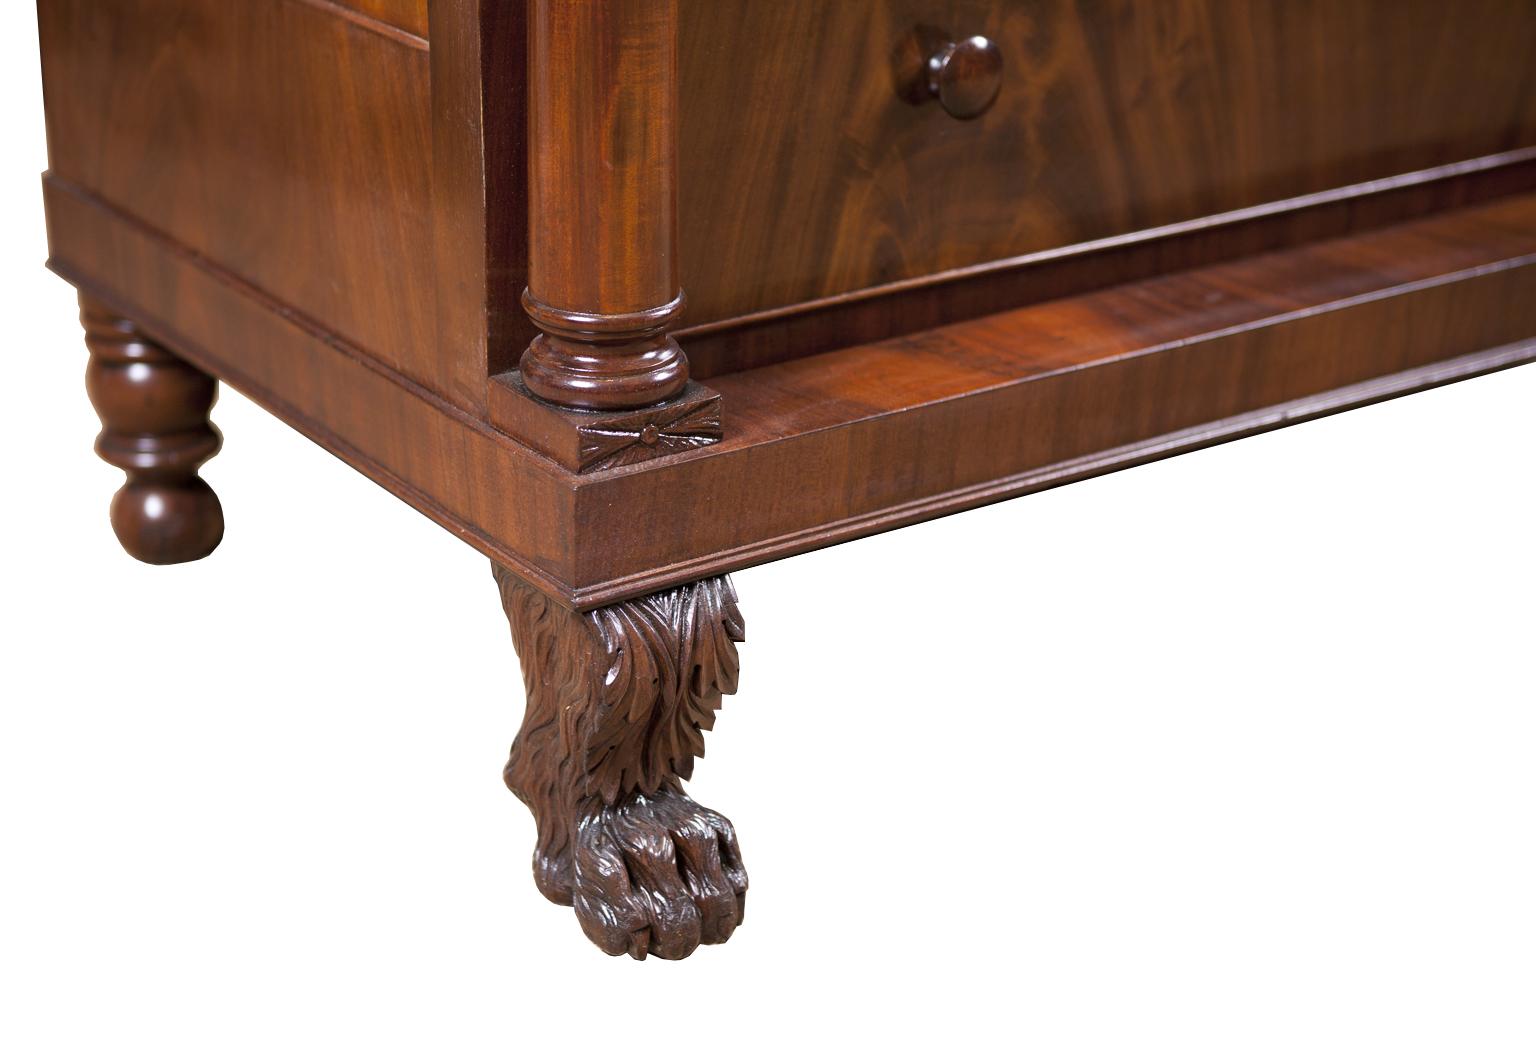 Polished Philadelphia Federal Chest of Drawers in Mahogany, American, circa 1815